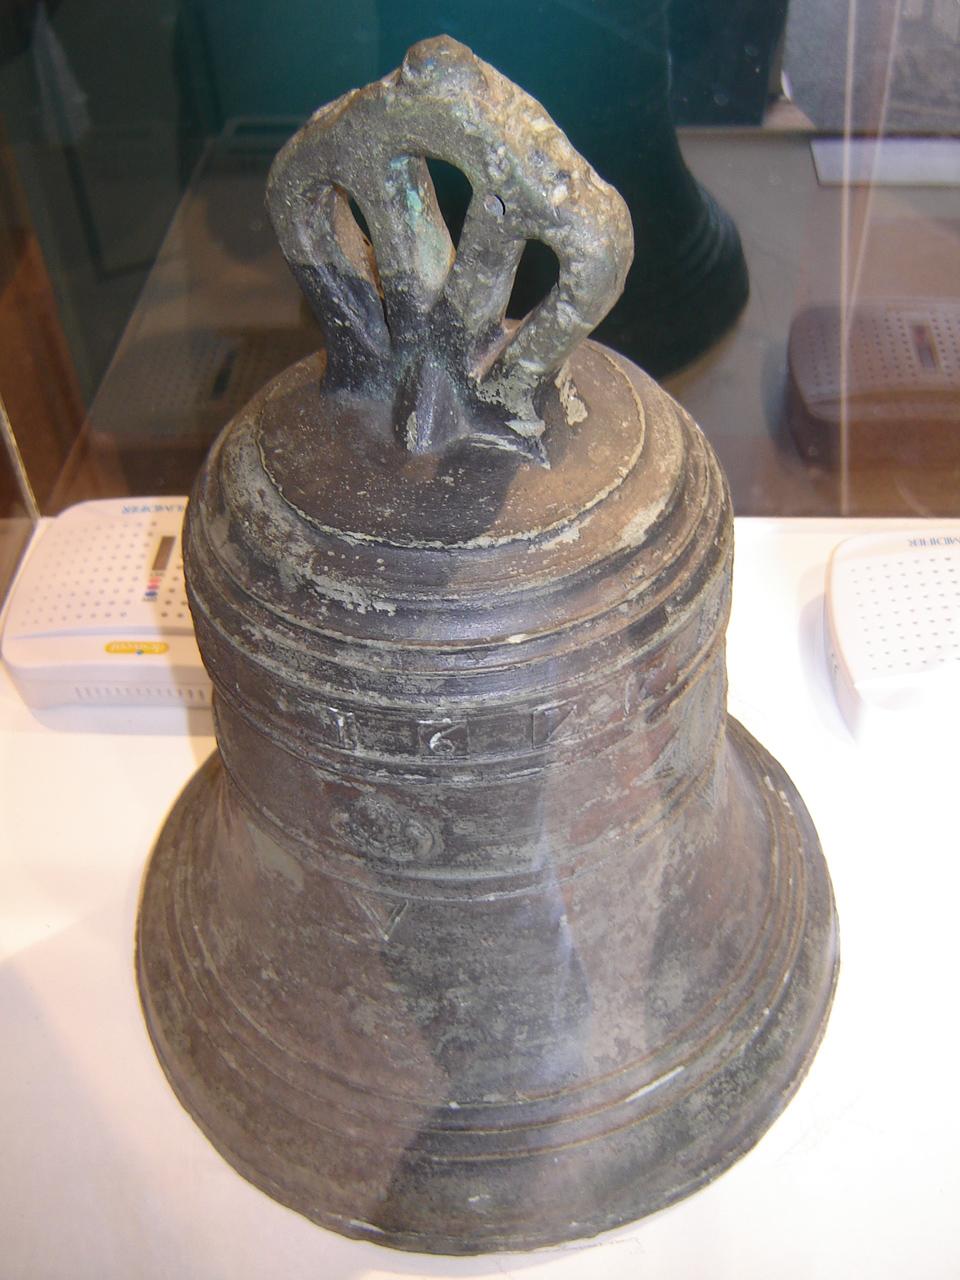 The Bronze Bell recovered from the